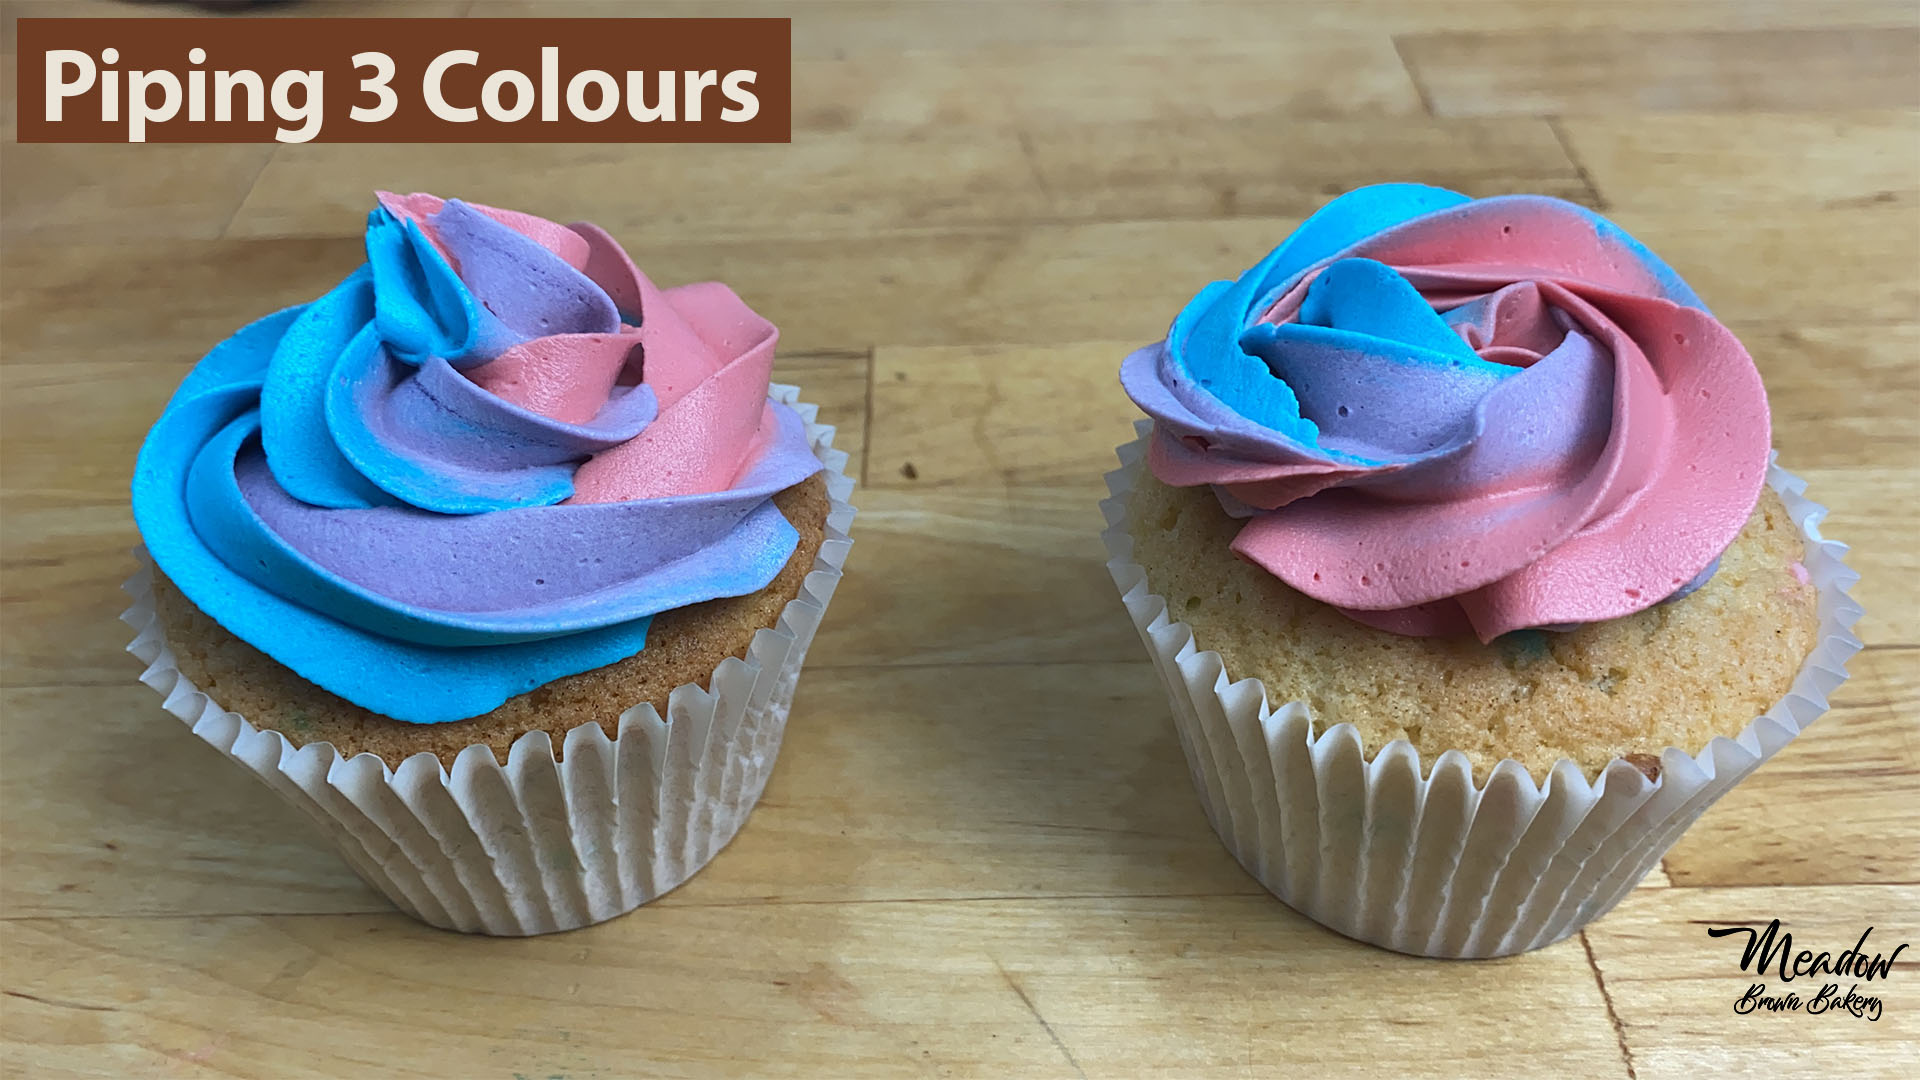 How to pipe 3 colours on cupcakes